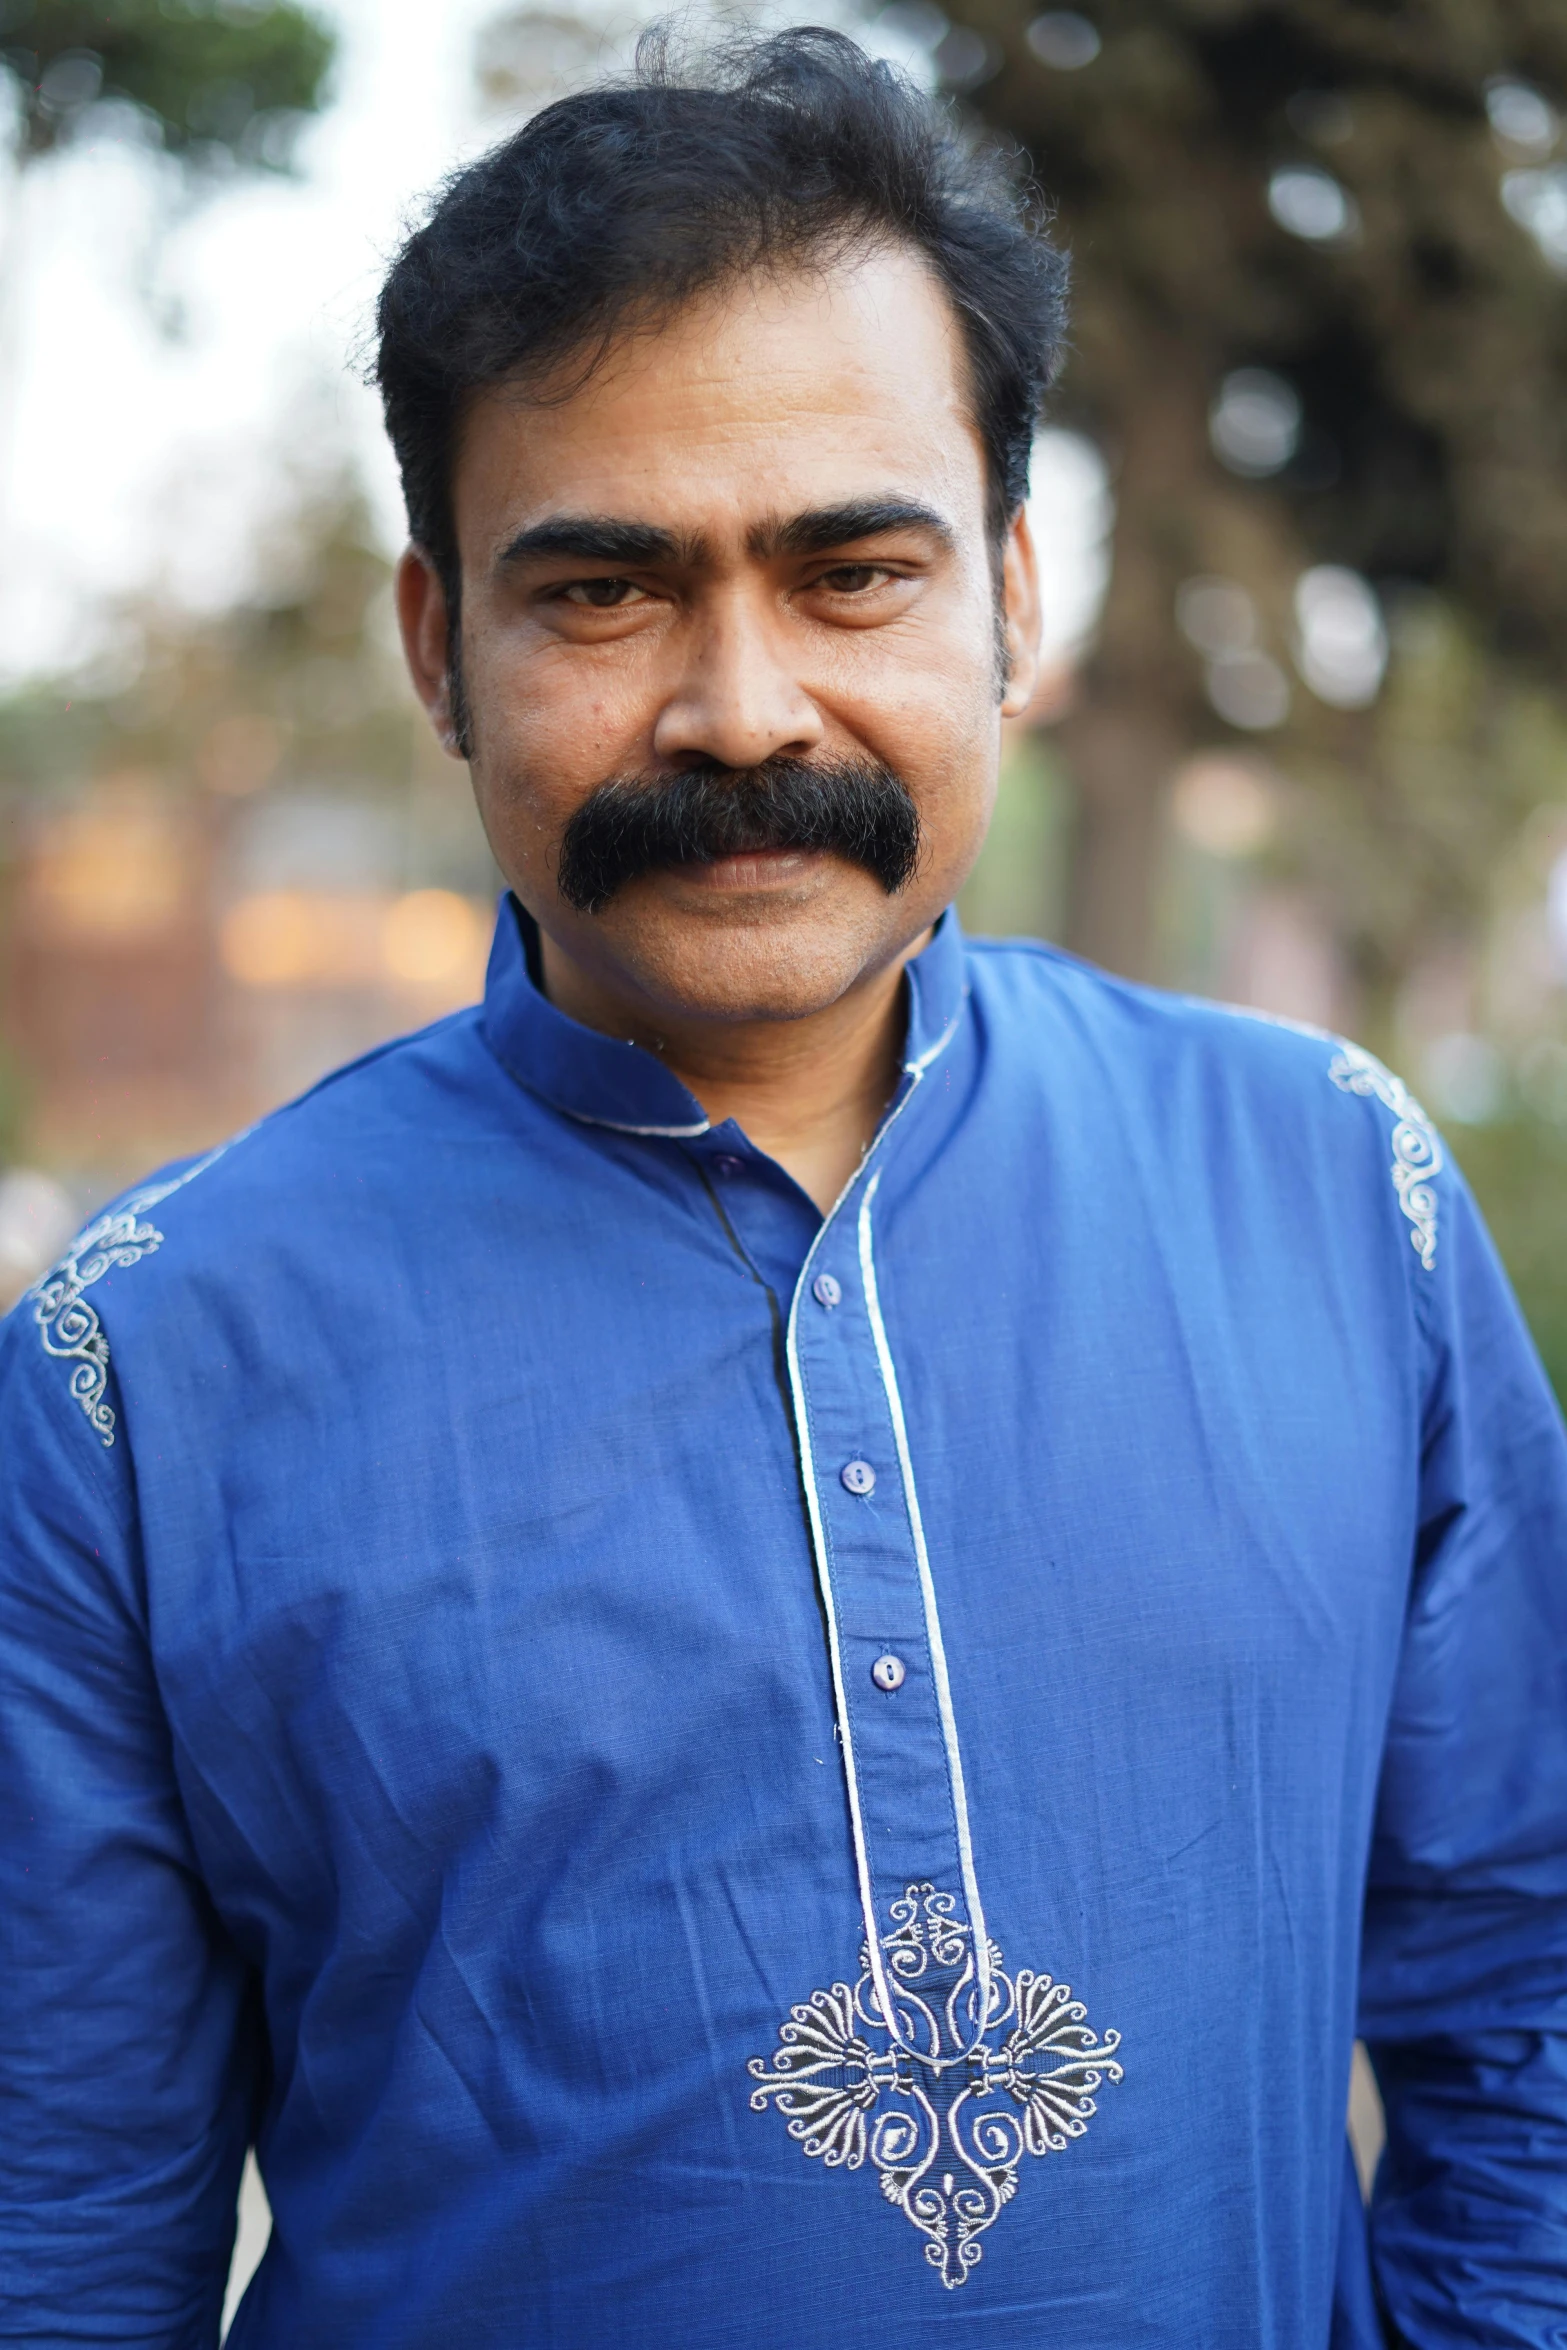 a man with a mustache and blue shirt